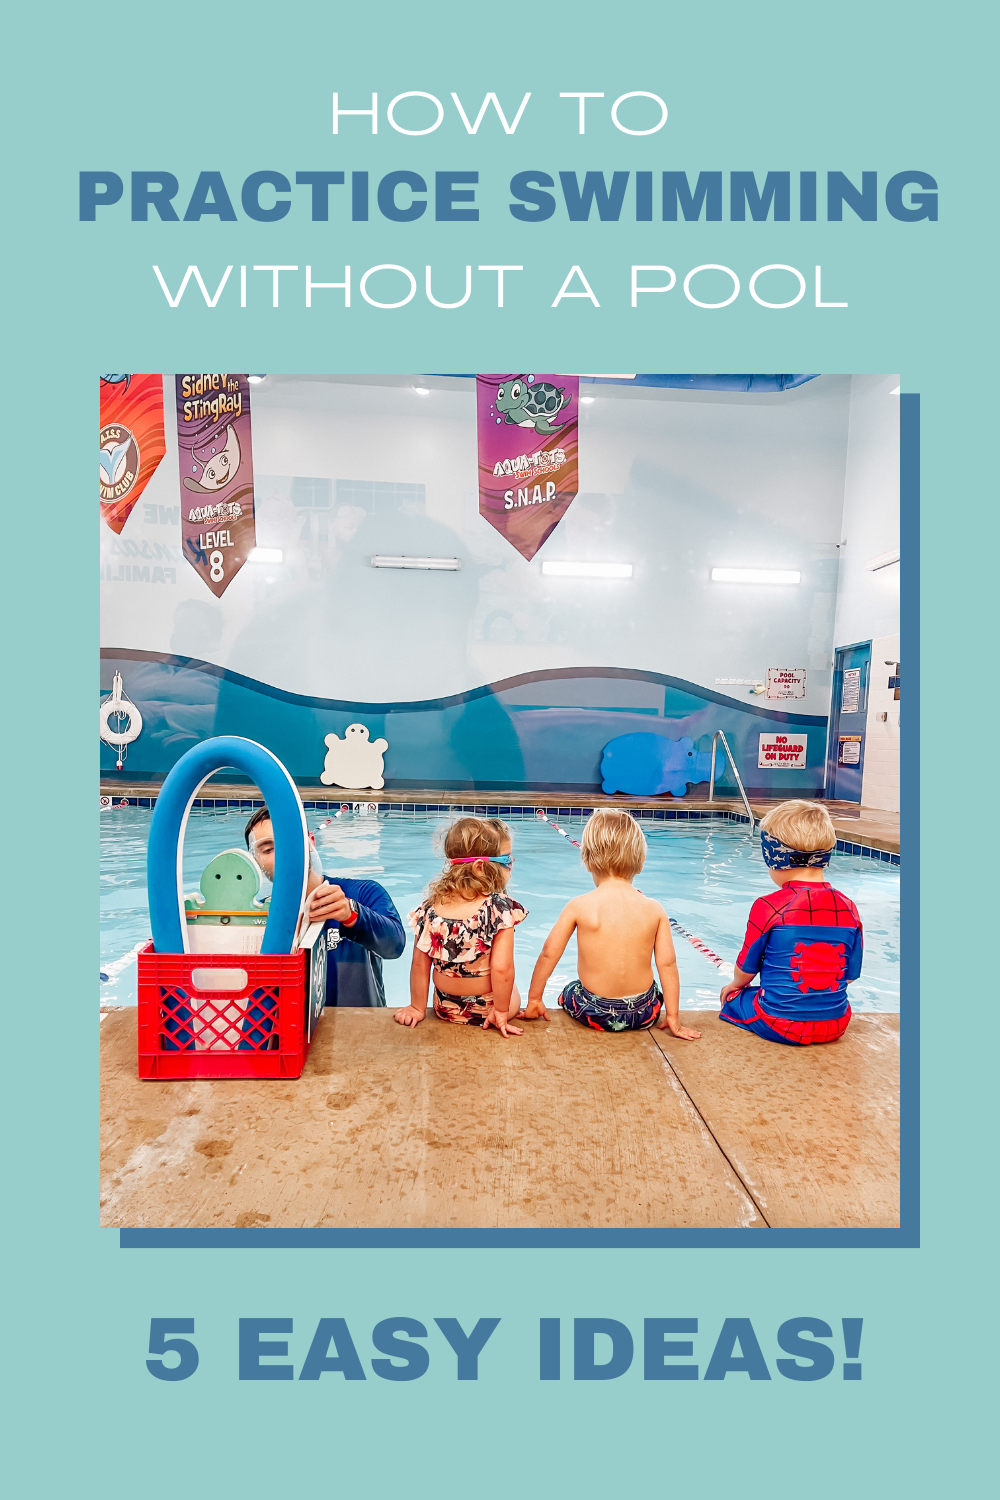 5 Ways to Practice Swimming Without a Pool - Keep your little swimmer's skills strong without a pool with these 5 ways to practice swimming without a pool. Great for helping your kids practice in between swim lessons! #swimlessons #swimming #swim #kidsswimming 